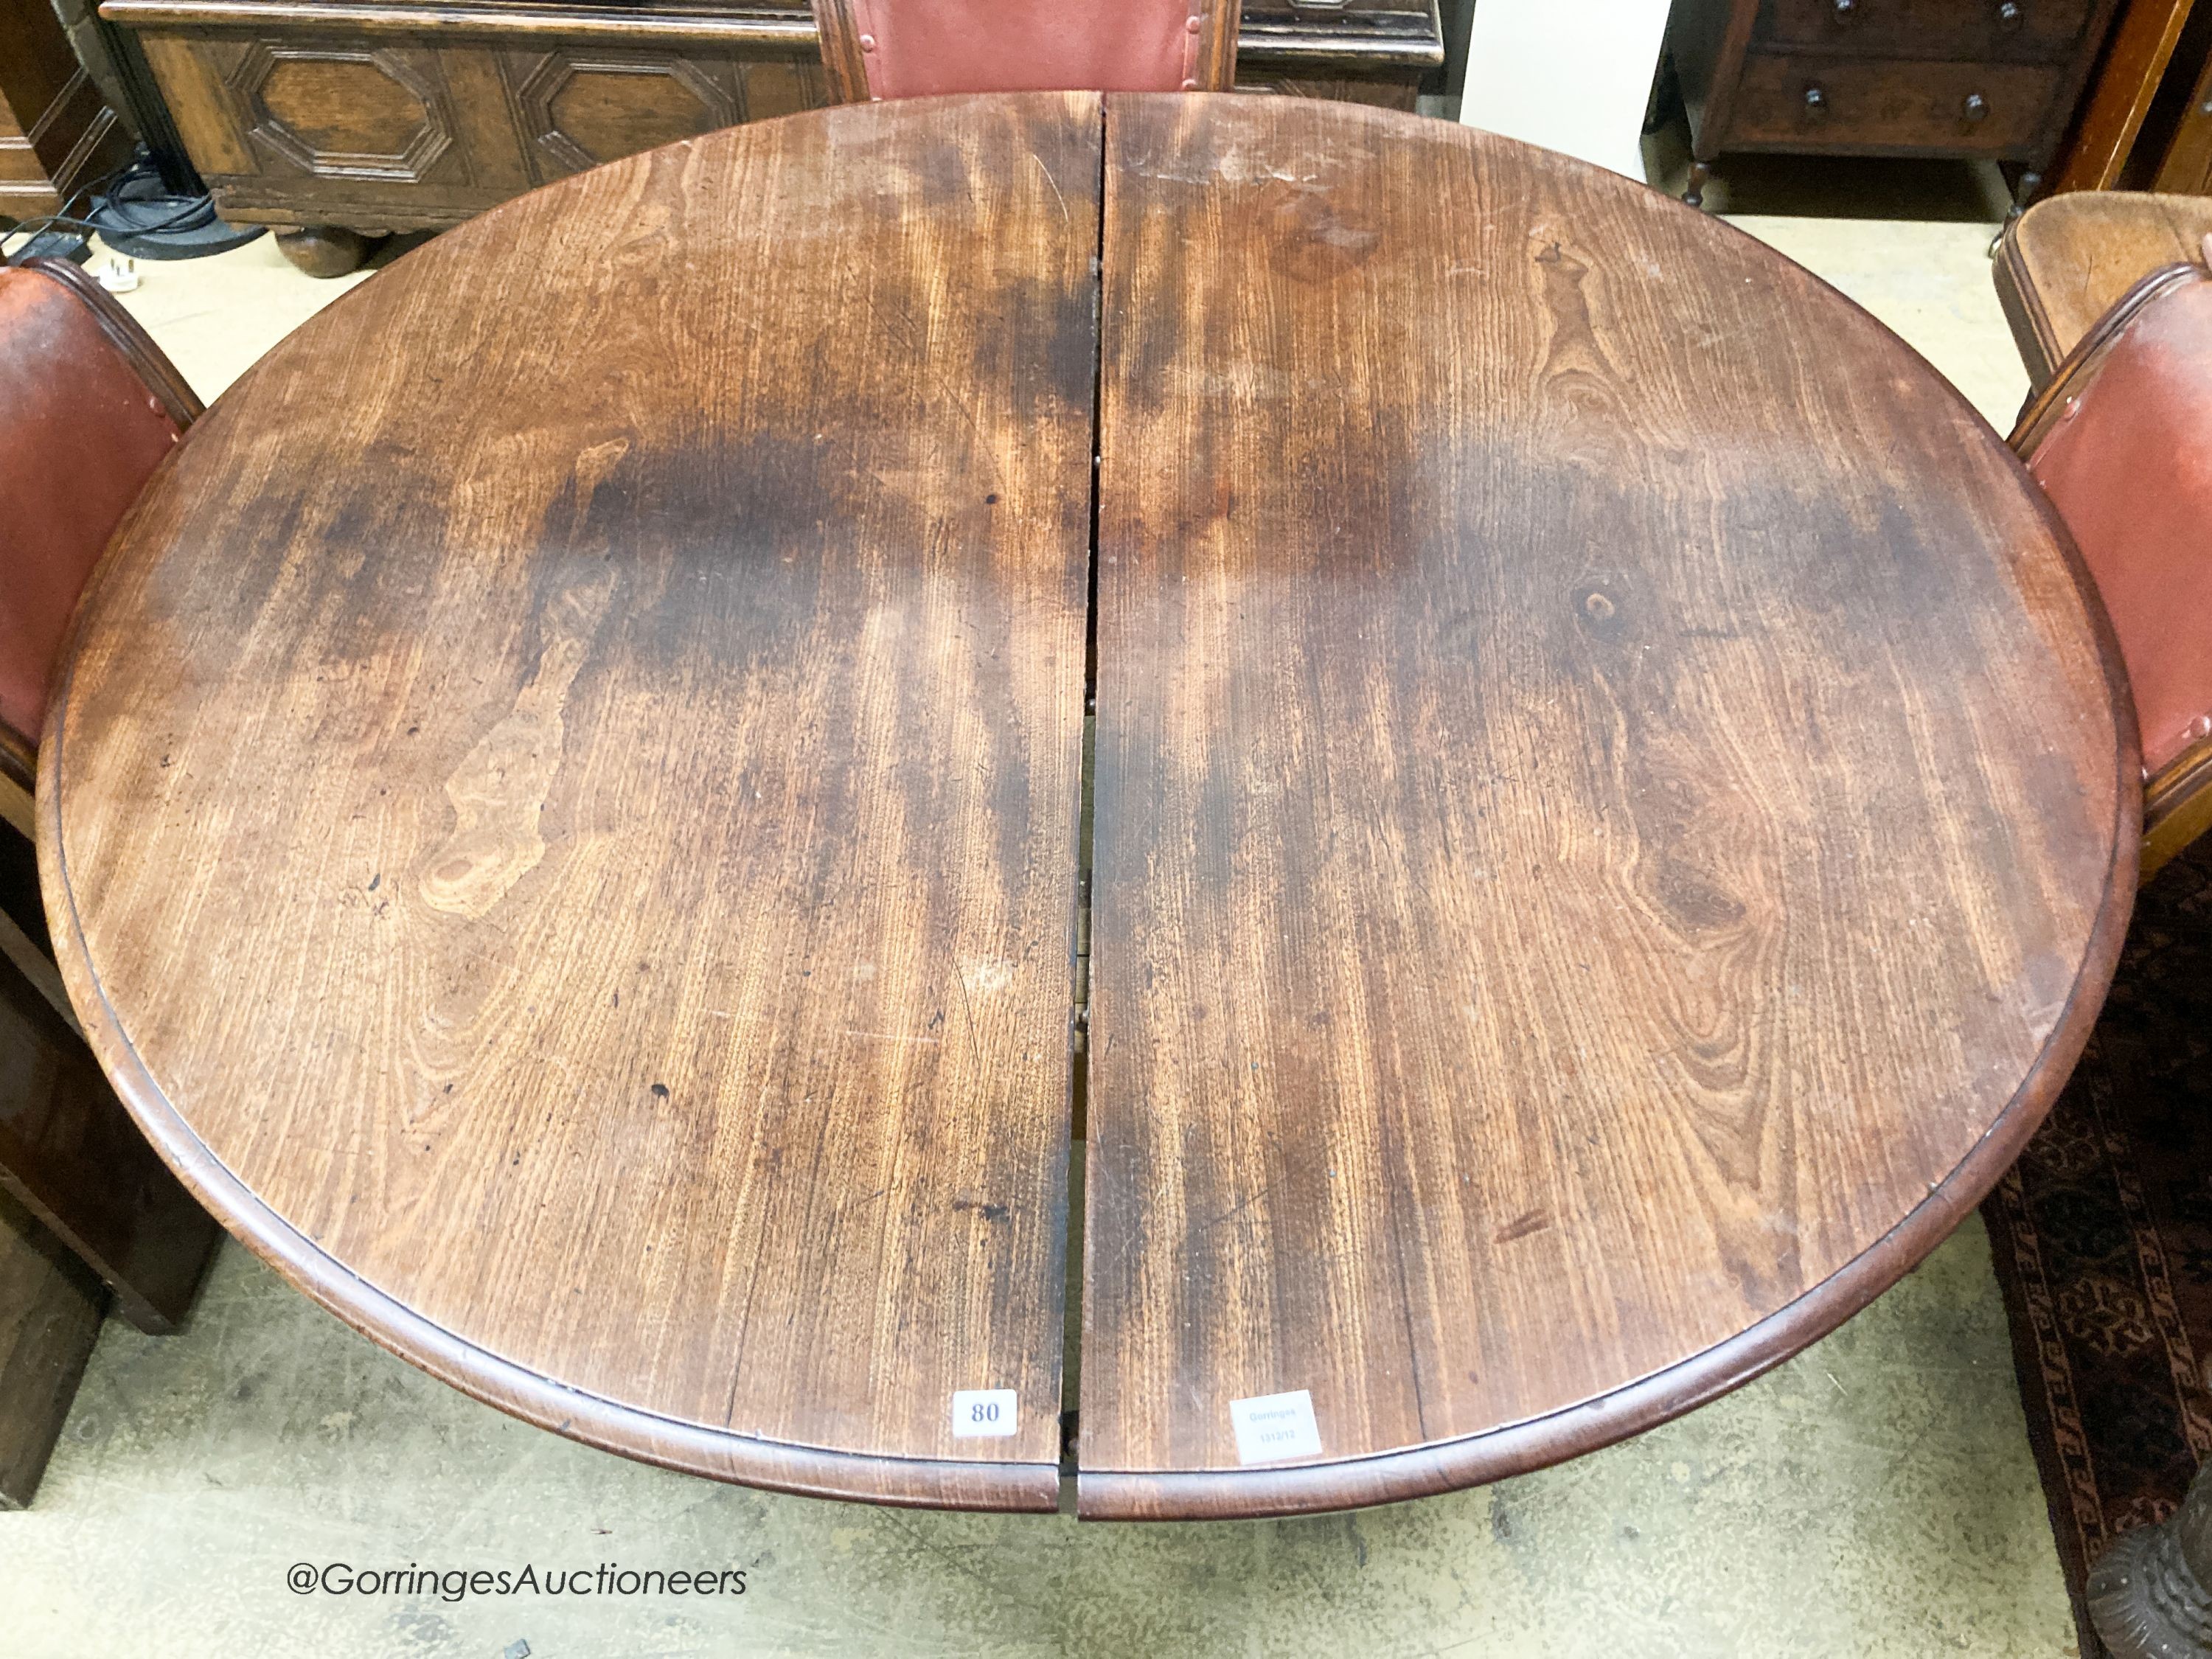 A Victorian mahogany circular extending dining table, (no leaves) length 140cm, depth 135cm, height 75cm